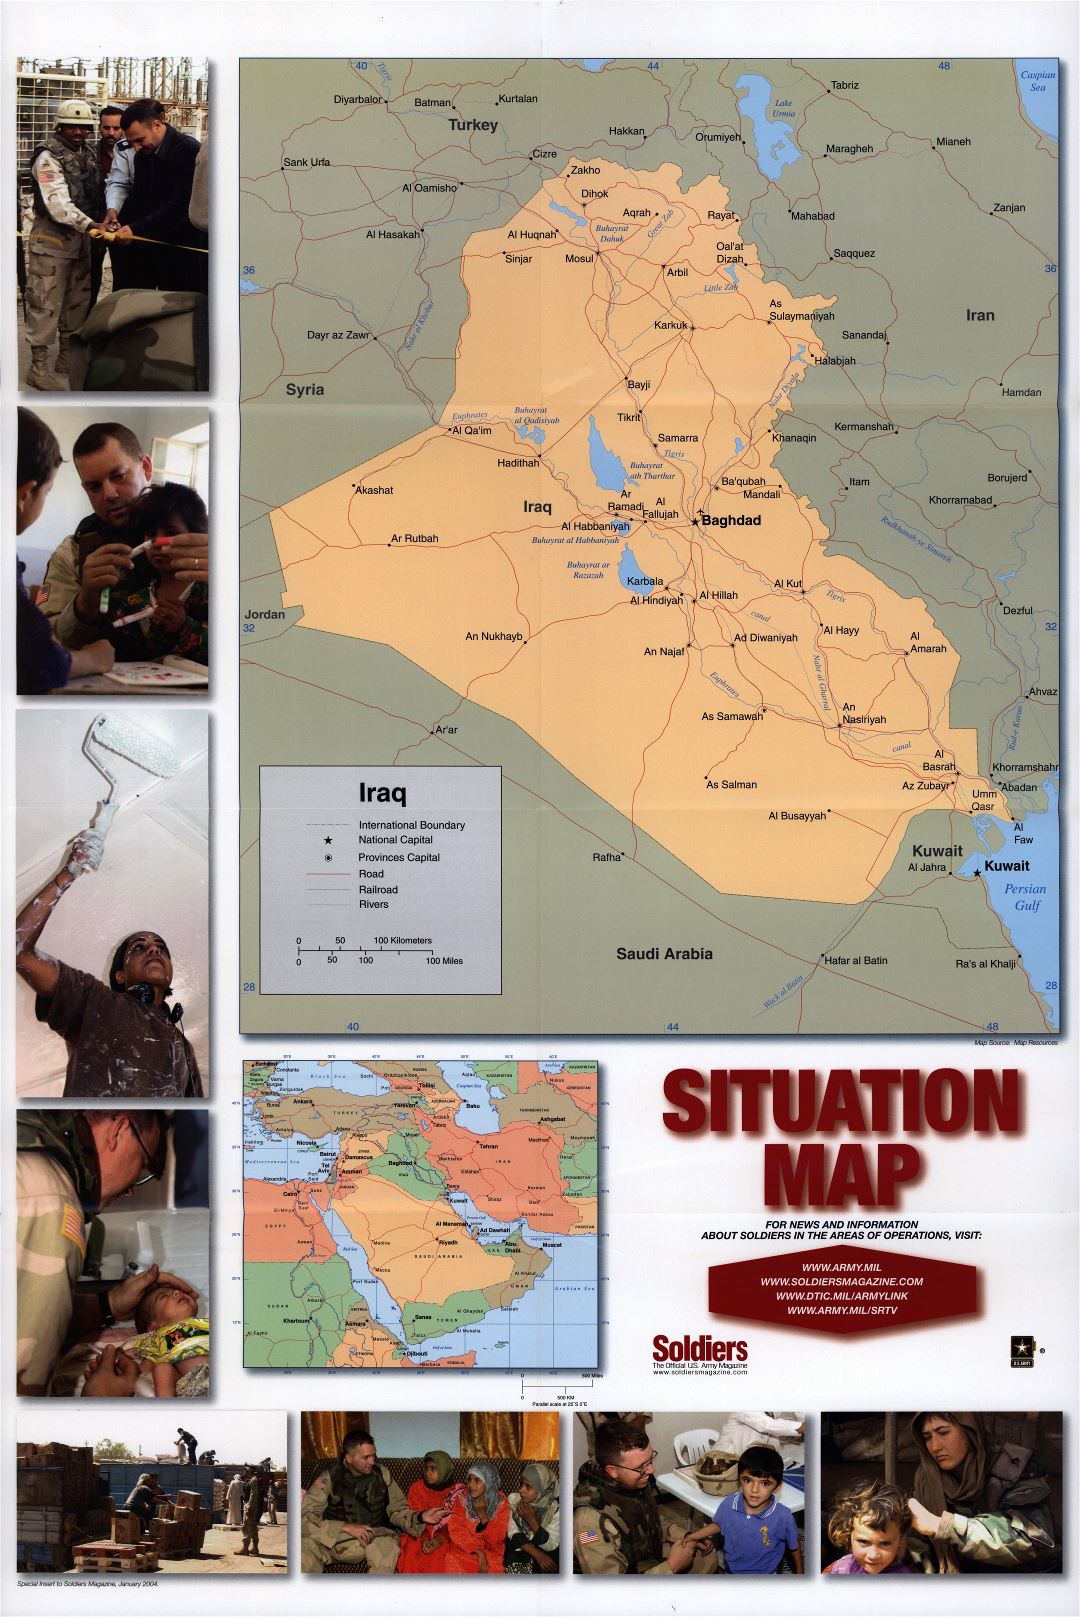 Large scale situation map of Iraq